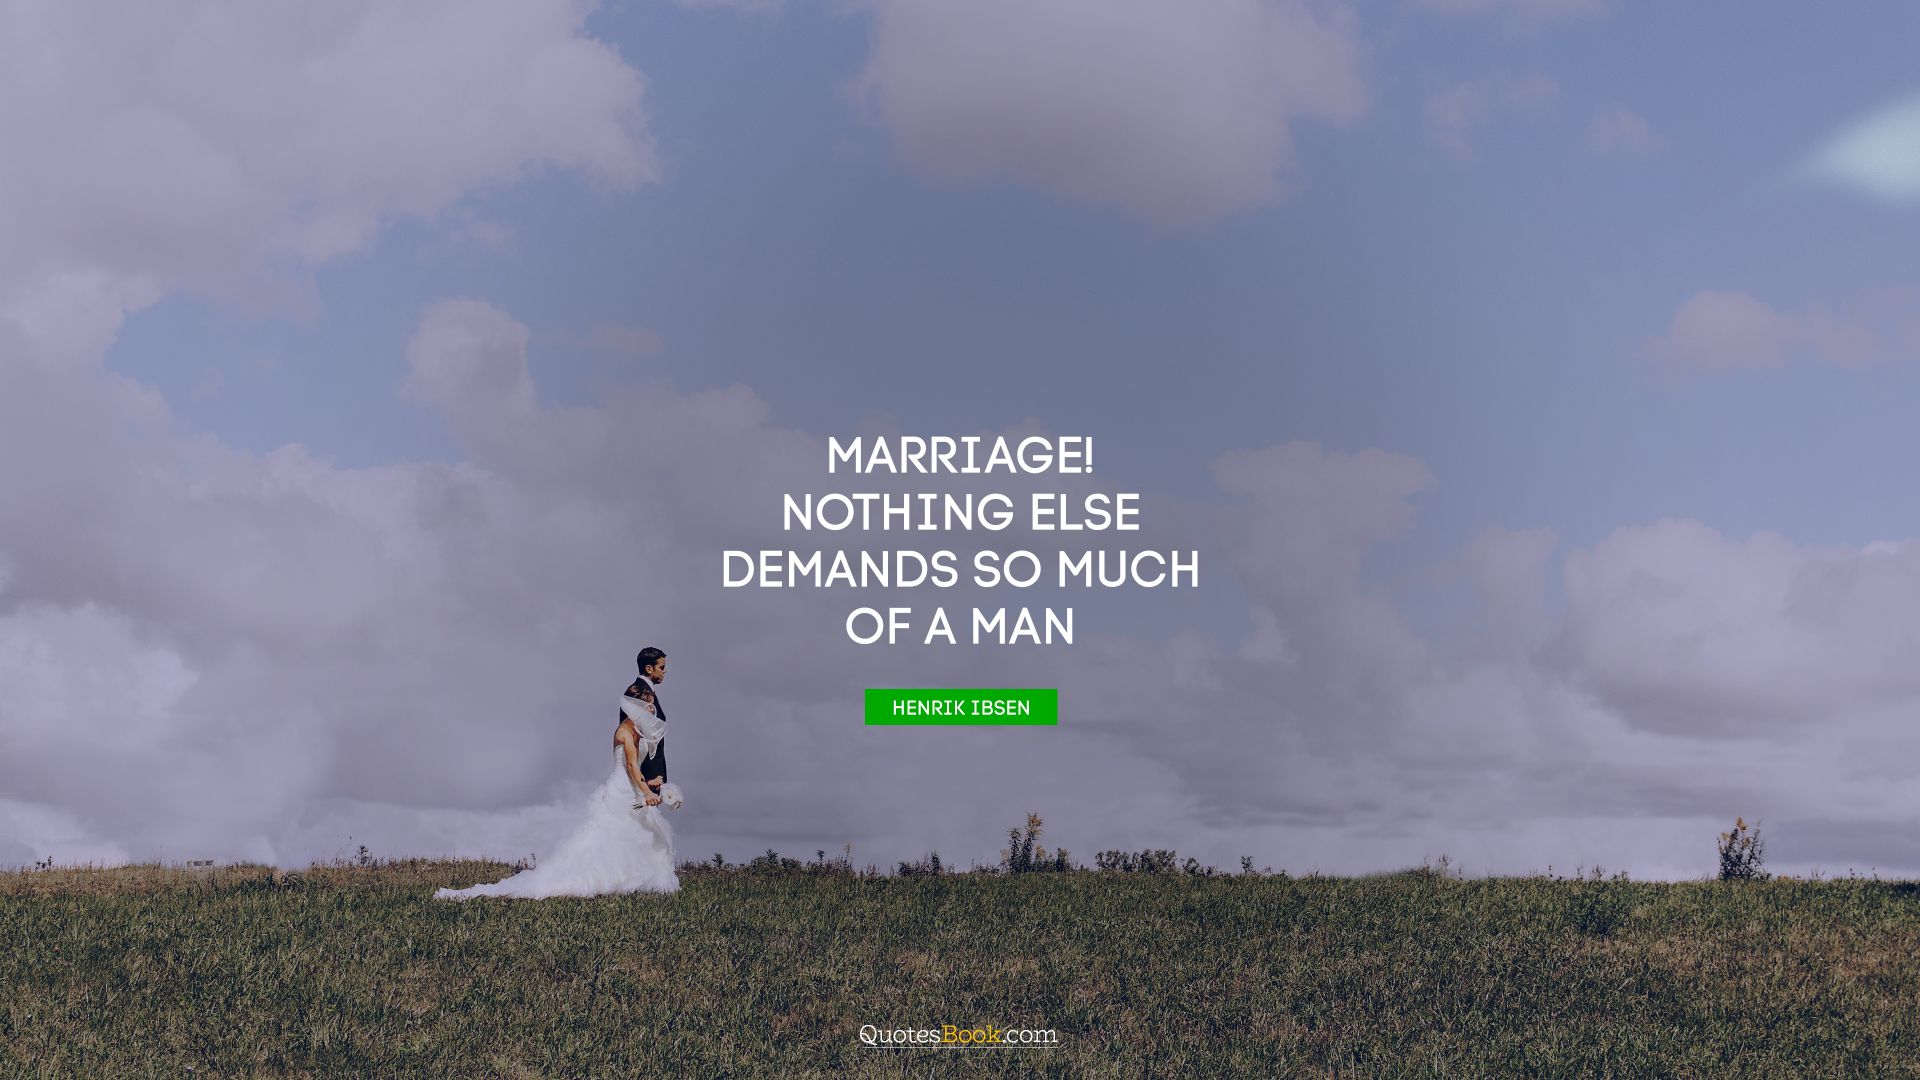 Marriage! Nothing else demands so much of a man. - Quote by Henrik Ibsen